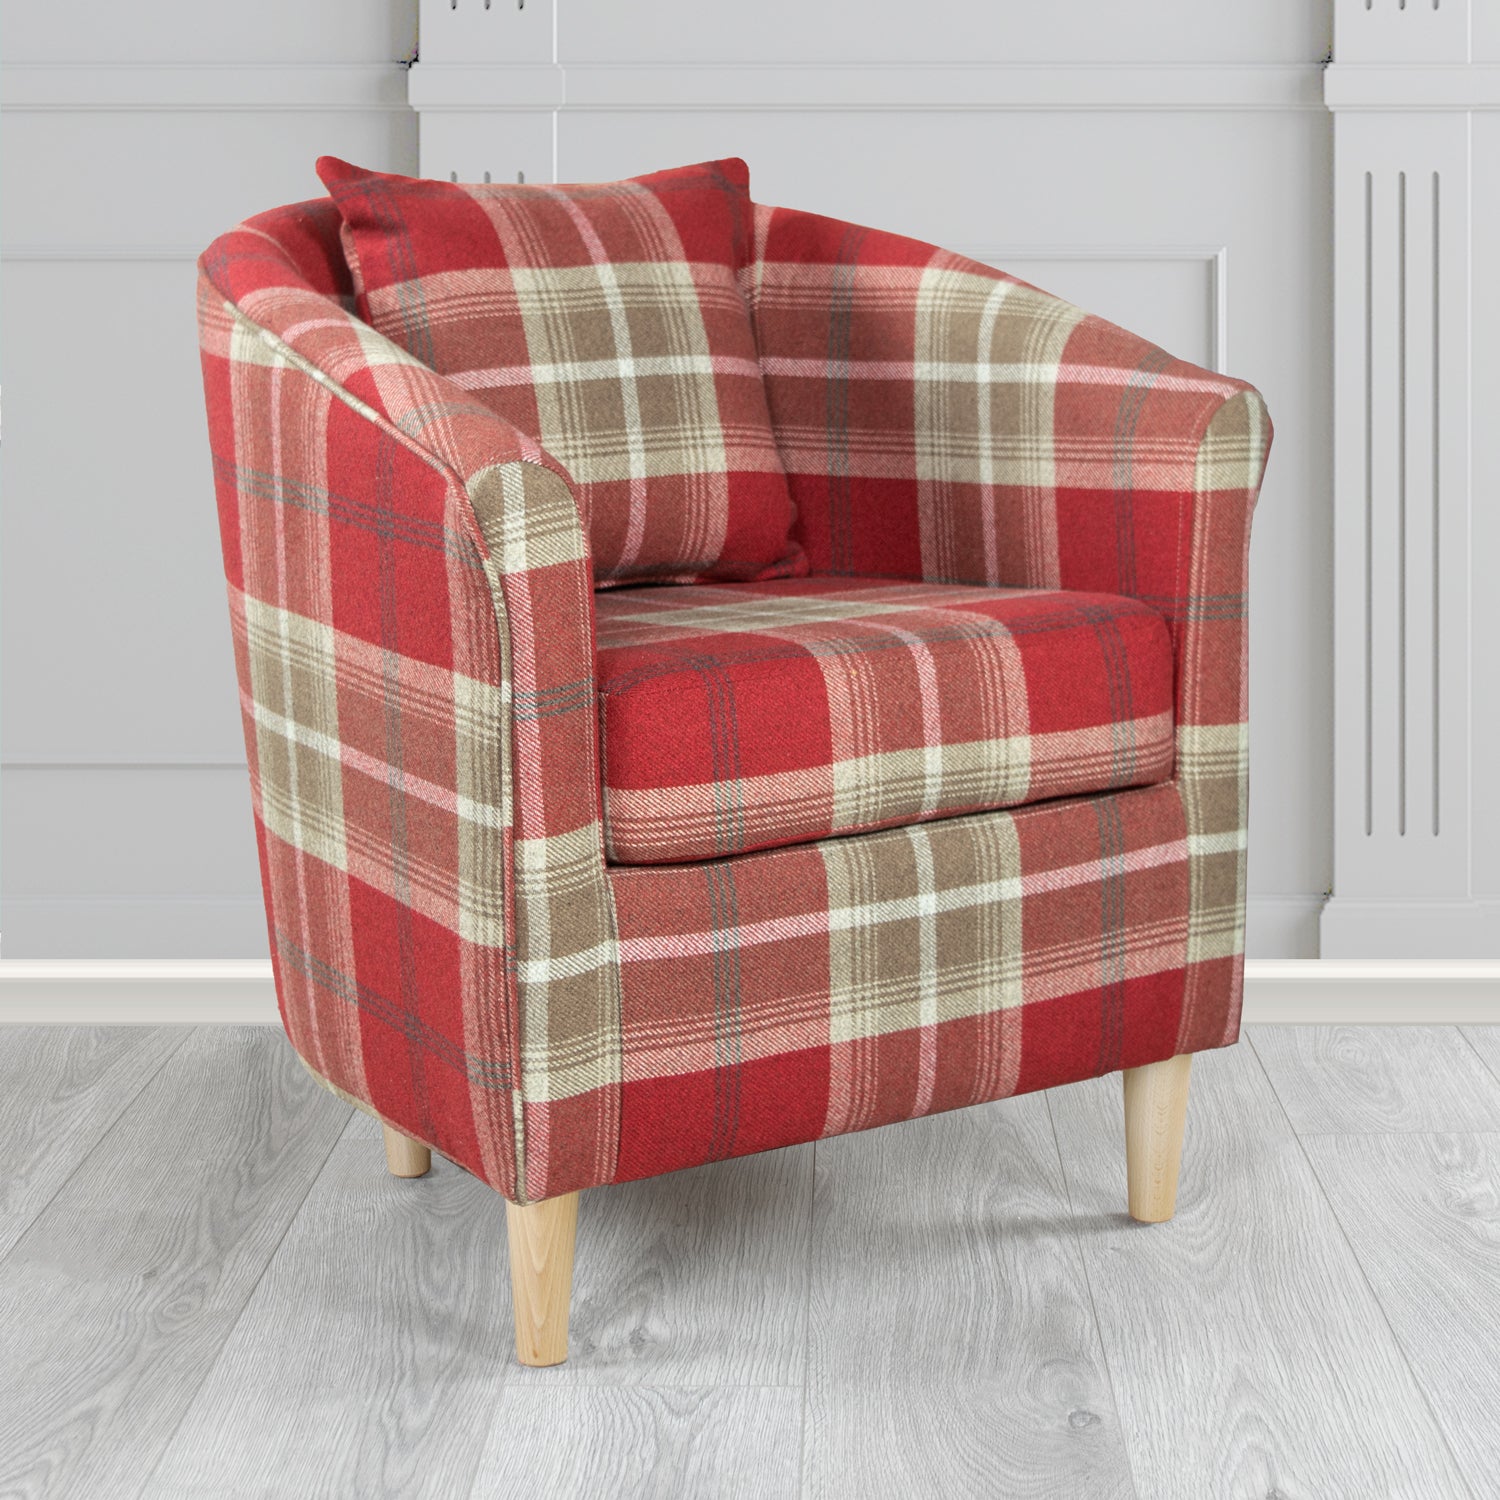 St Tropez Balmoral Red Tartan Fabric Tub Chair with Scatter Cushion - The Tub Chair Shop